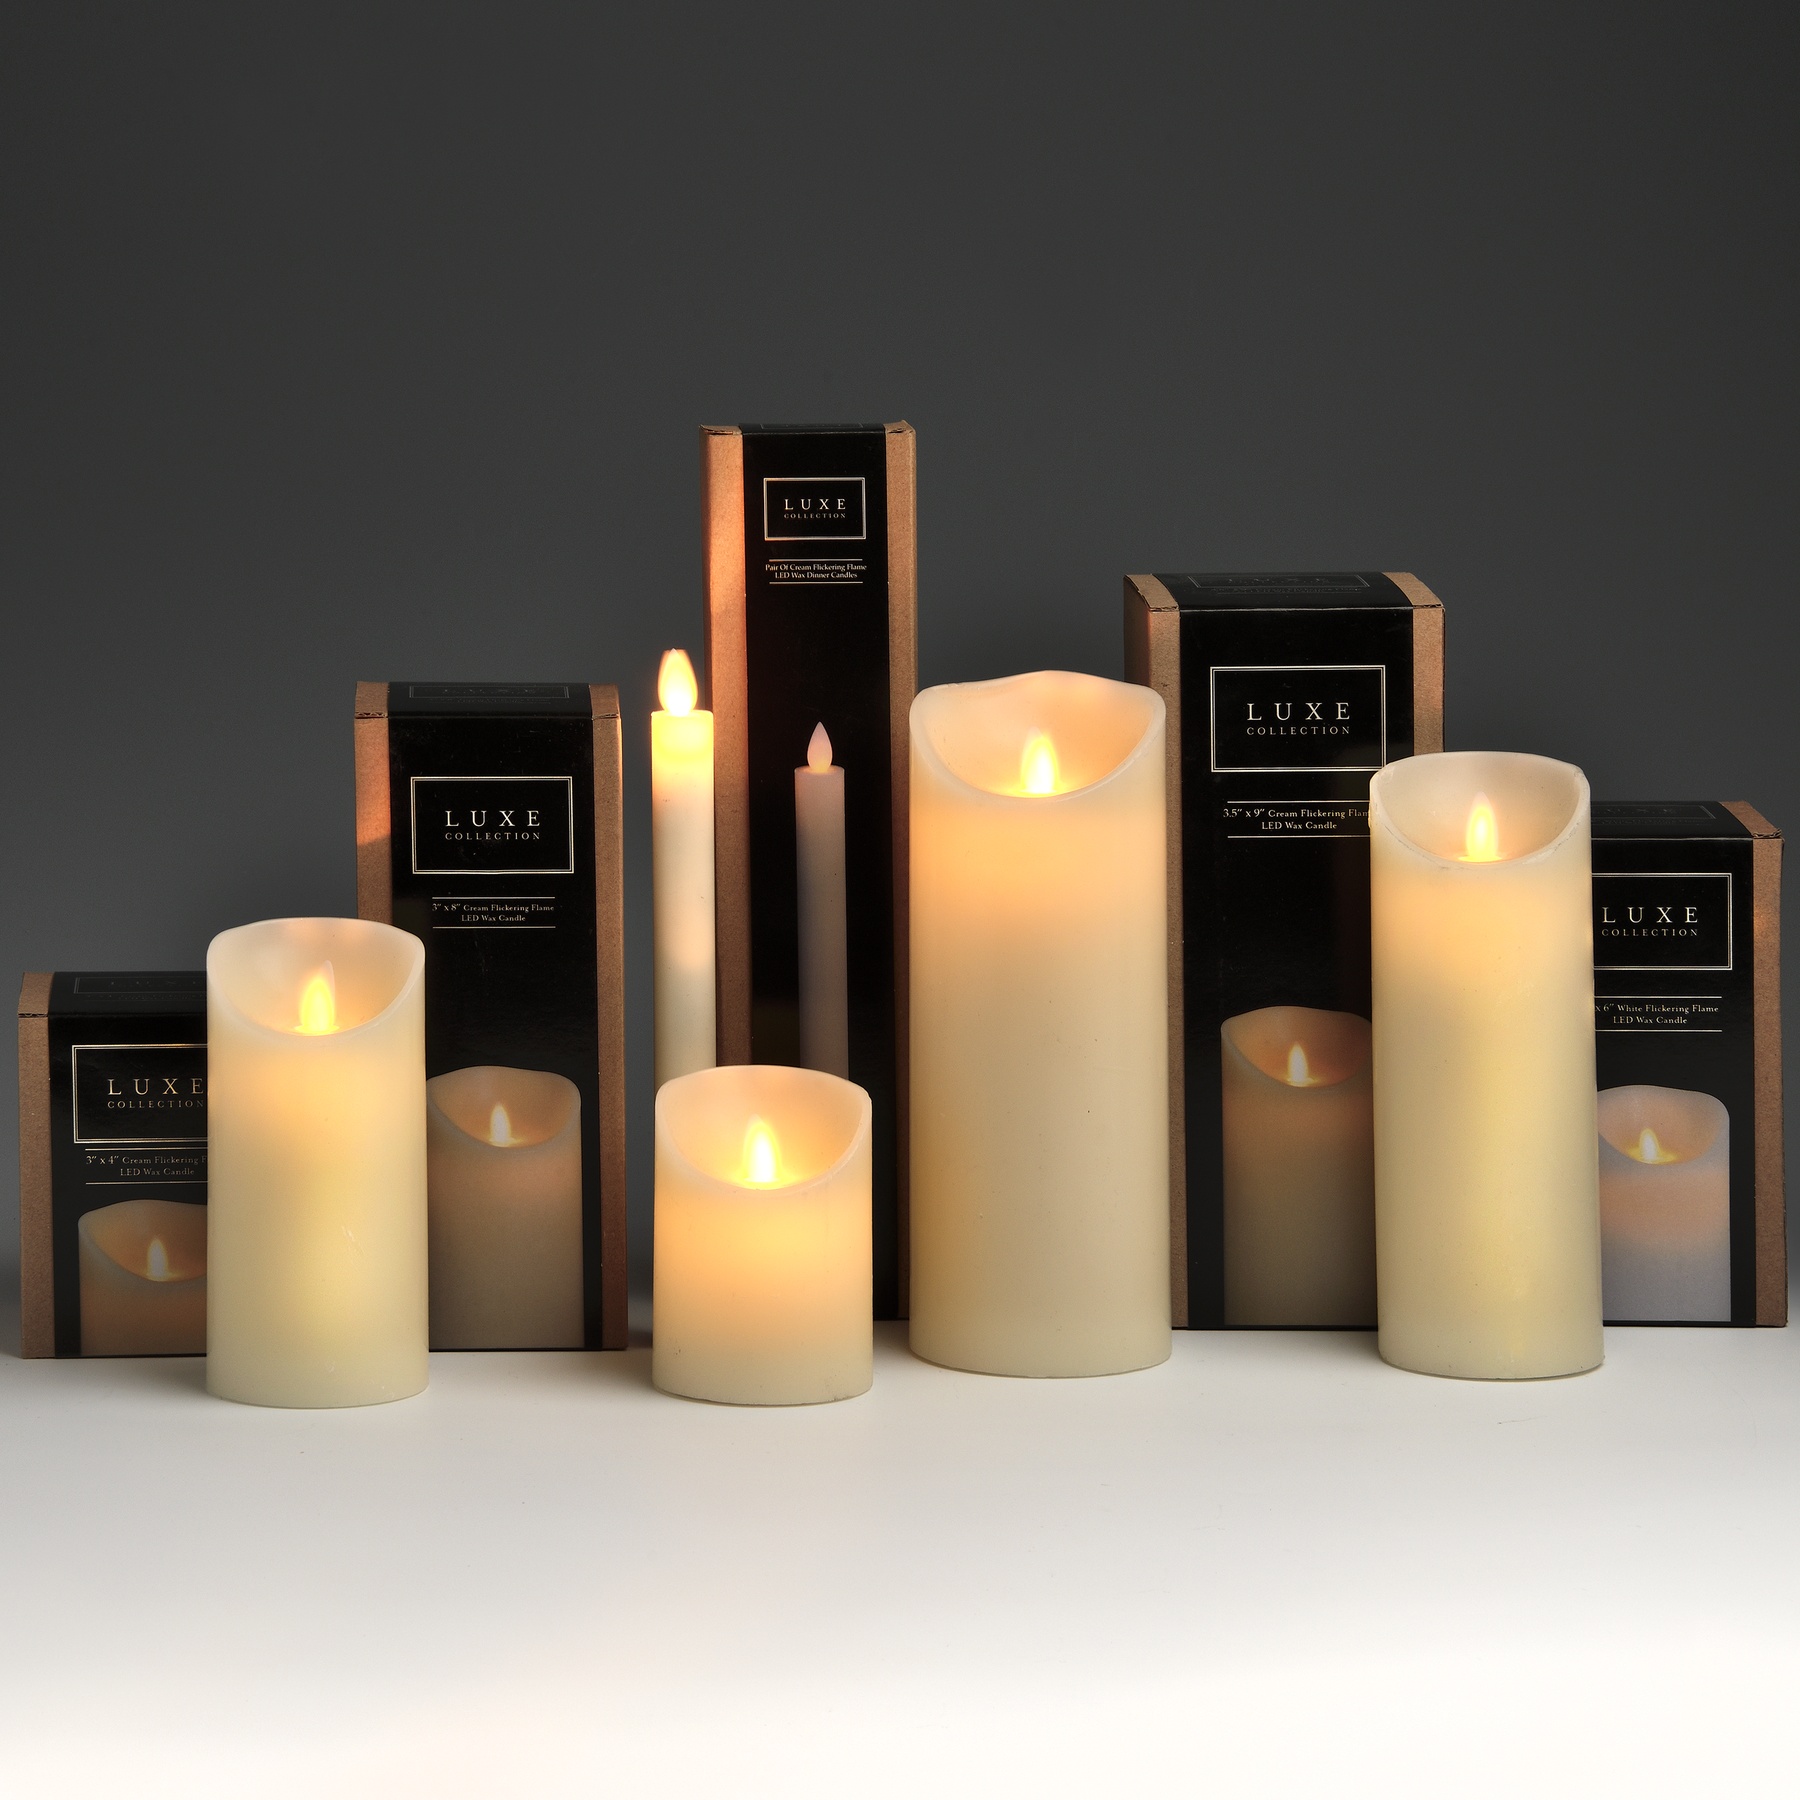 Luxe Collection 3 x 6 Cream Flickering Flame LED Wax Candle - Image 4